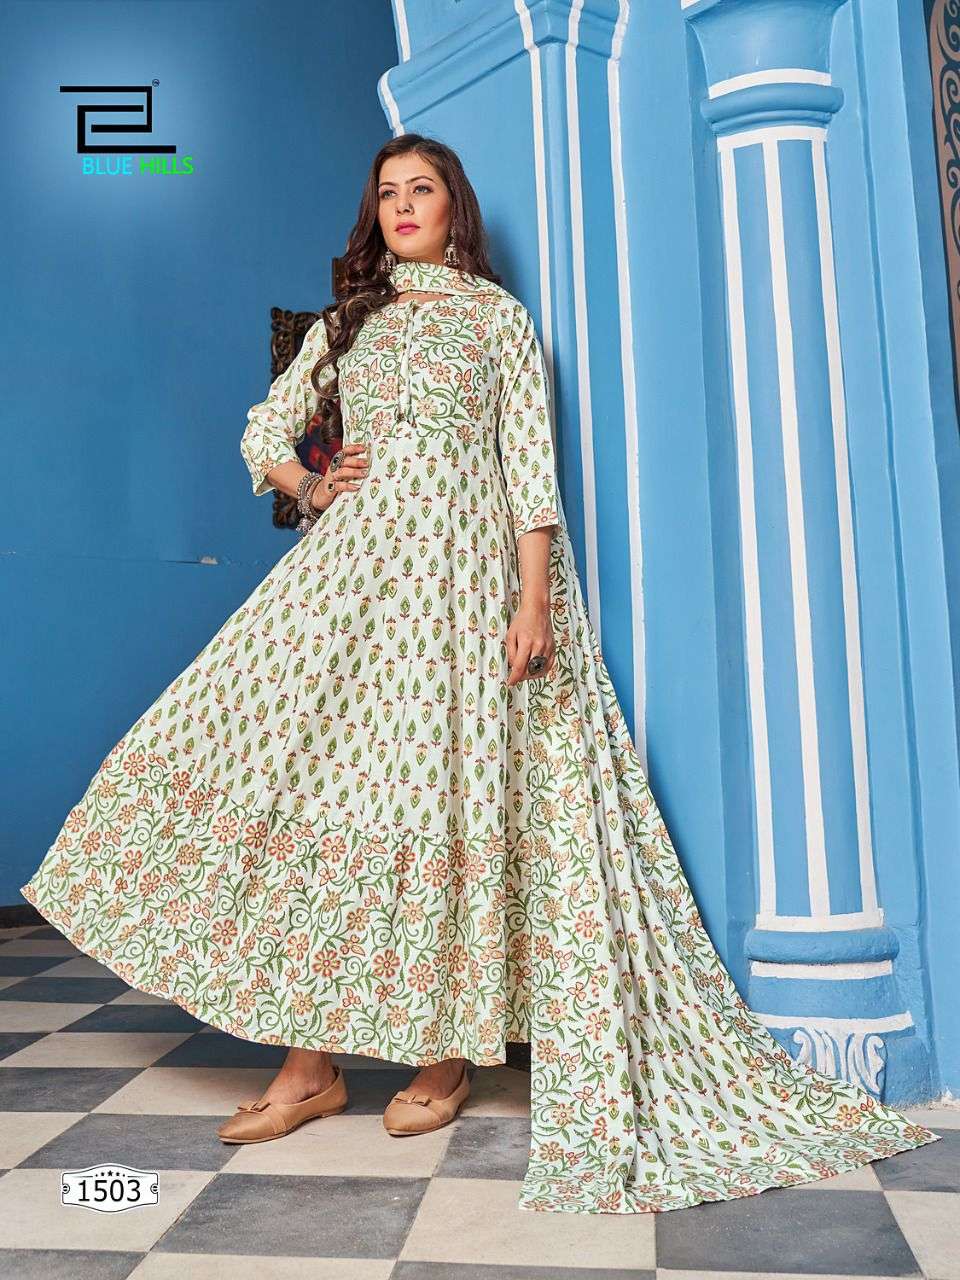 bluehills manika mage tithe vol 15 1501-1508 series fancy gown with dupatta catalogue new design